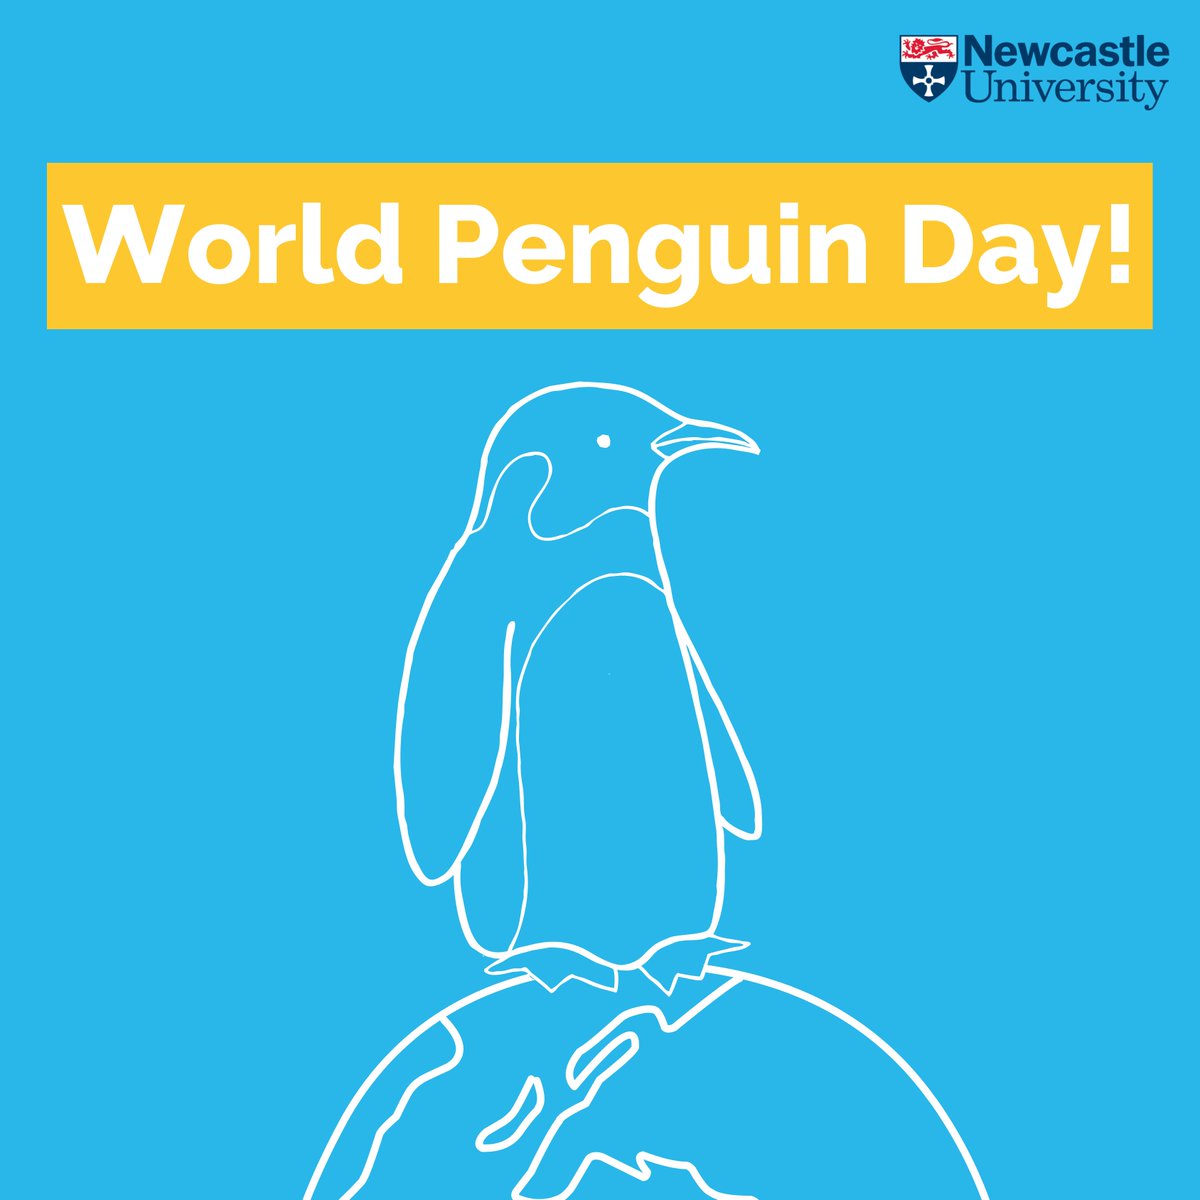 Today is World Penguin Day!